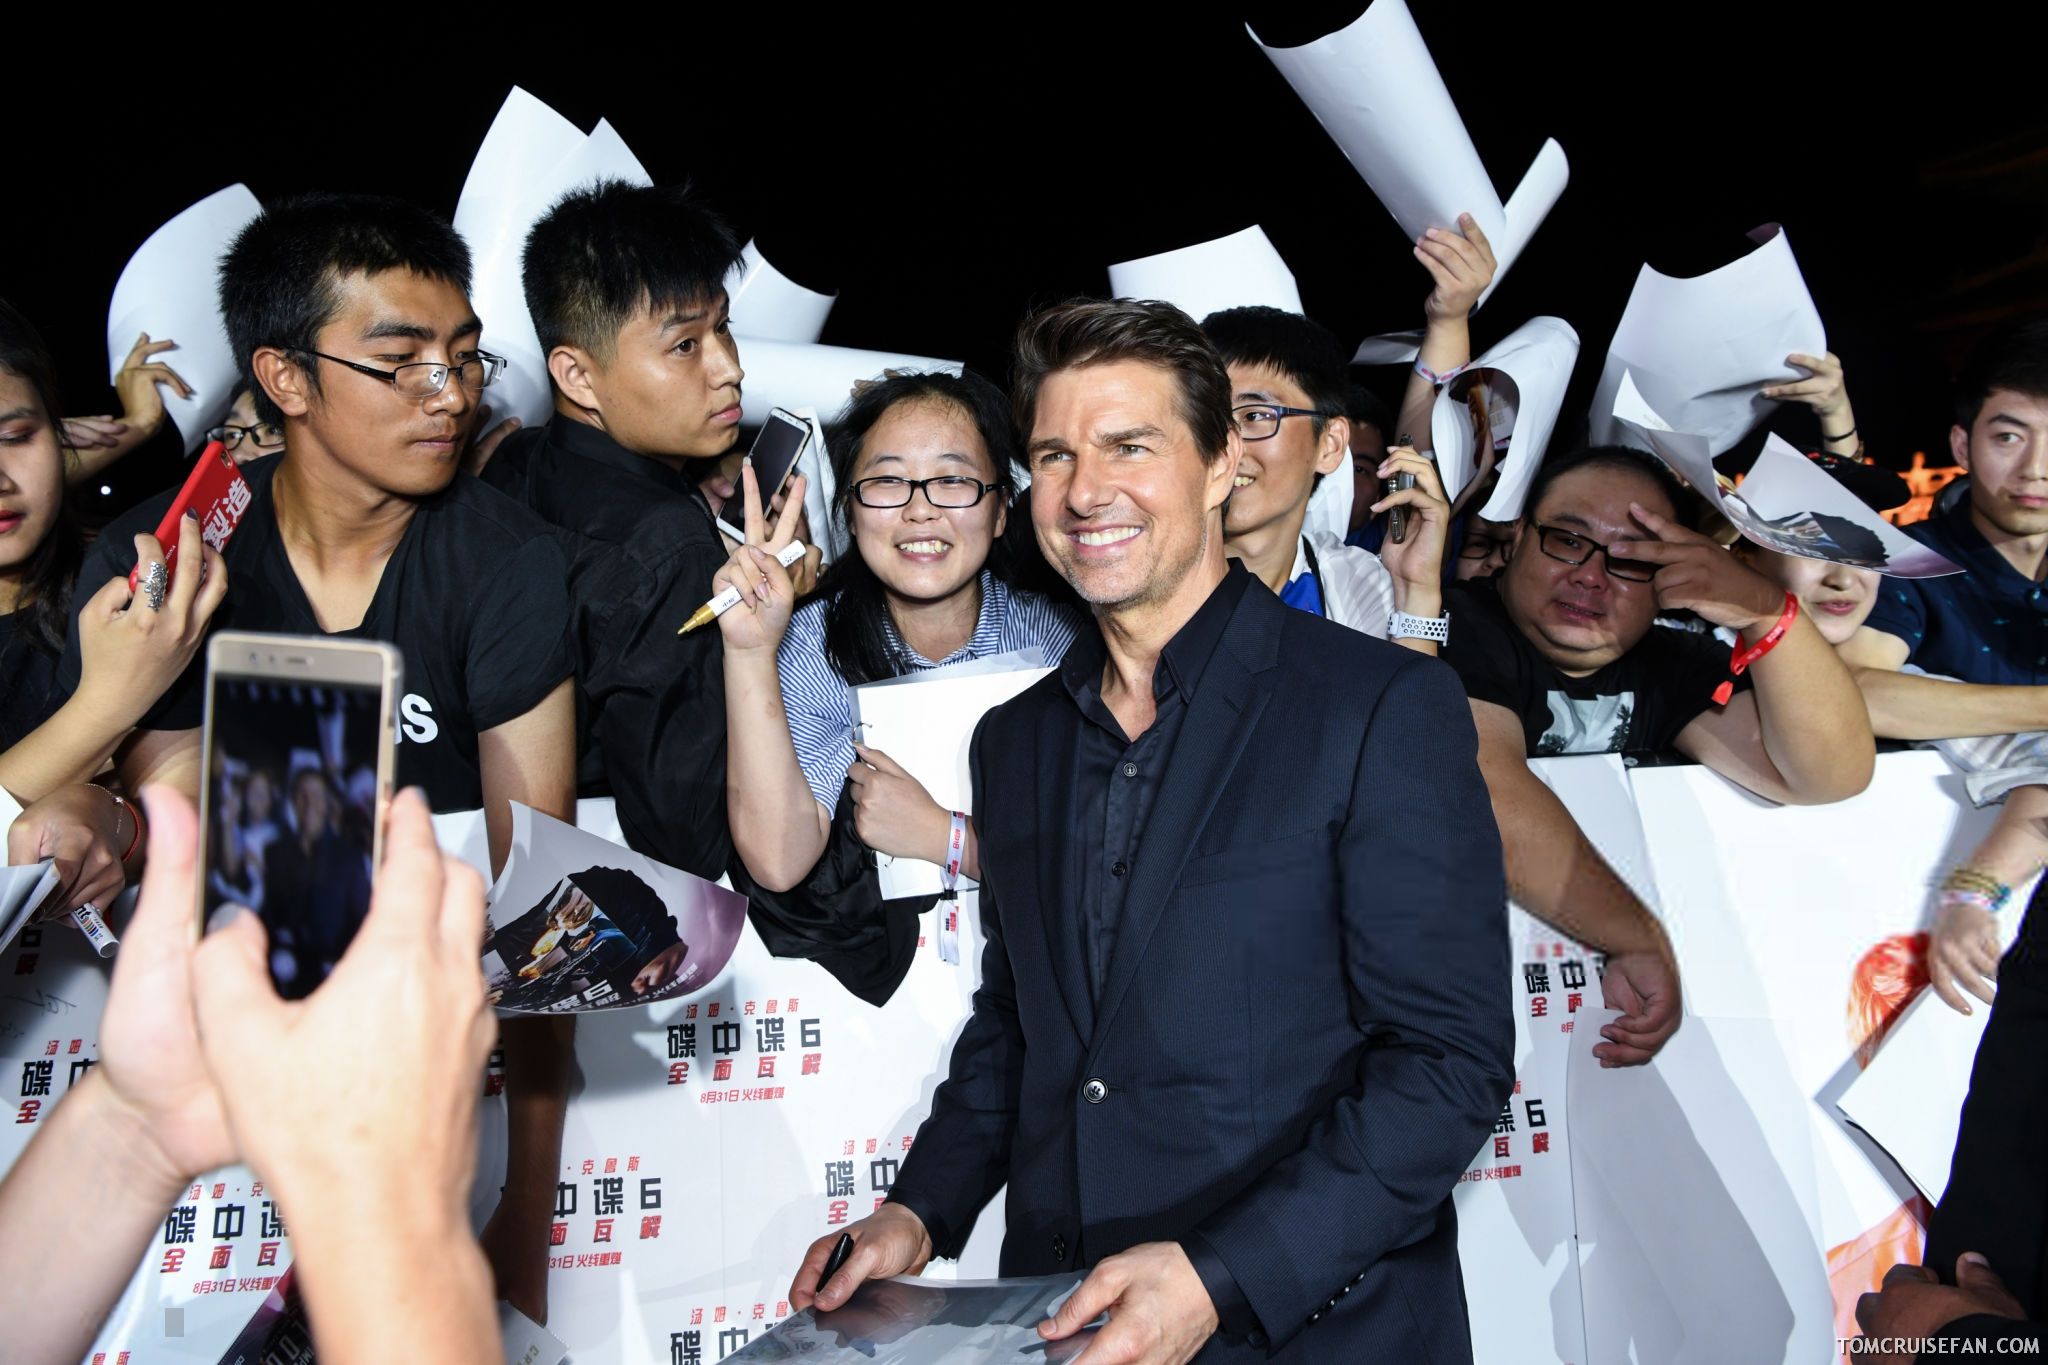 2018-08-29-Mission-Impossible-Fallout-Beijing-Premiere-030.jpg